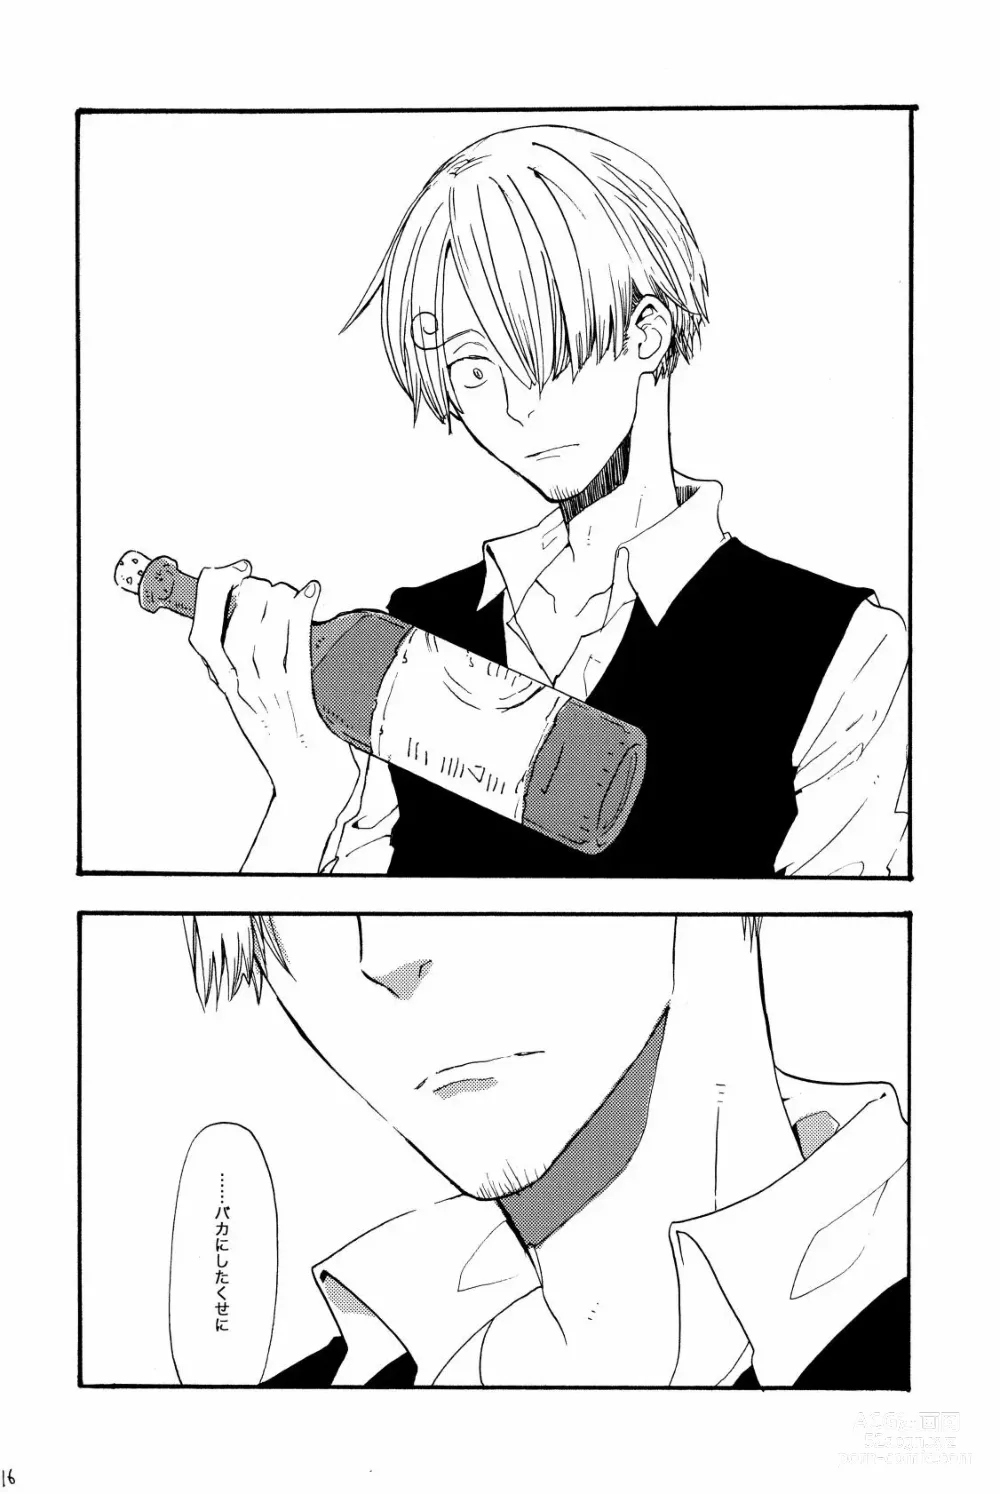 Page 75 of doujinshi 315569261second